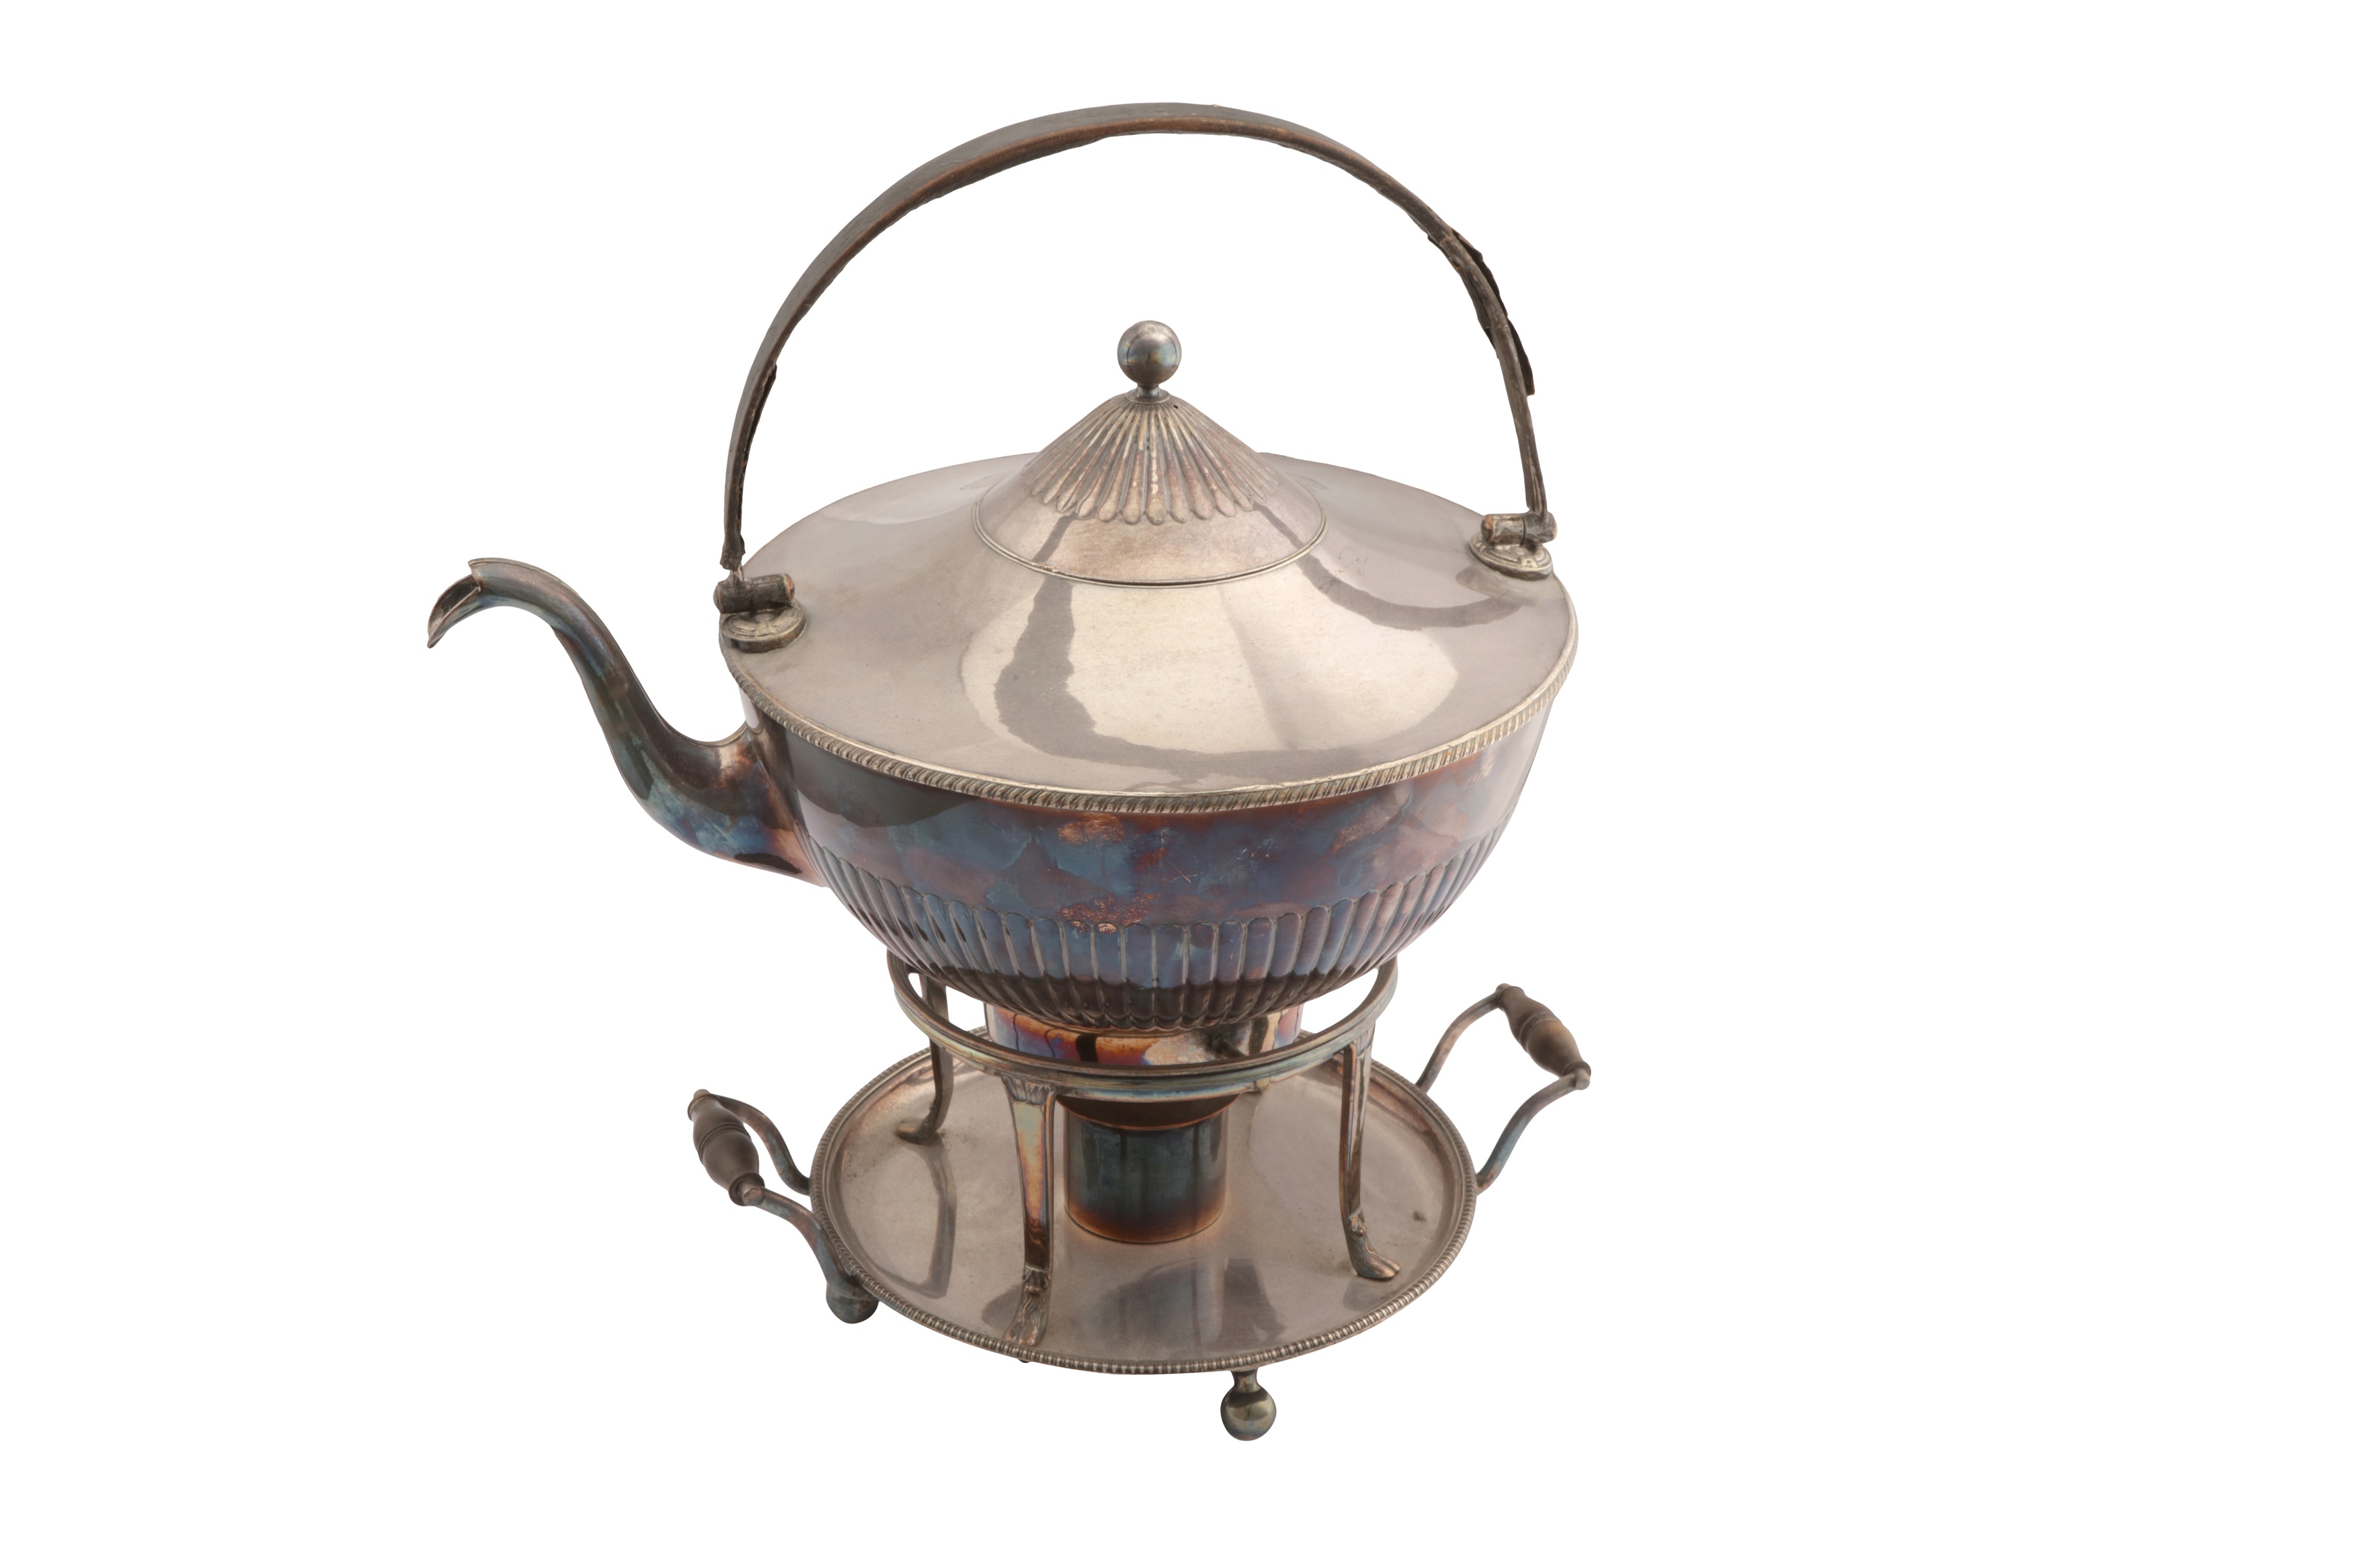 A GEORGE III OLD SHEFFIELD SILVER PLATE THREE QUART KETTLE AND BURNER STAND, CIRCA 1800 BY WATSON AN